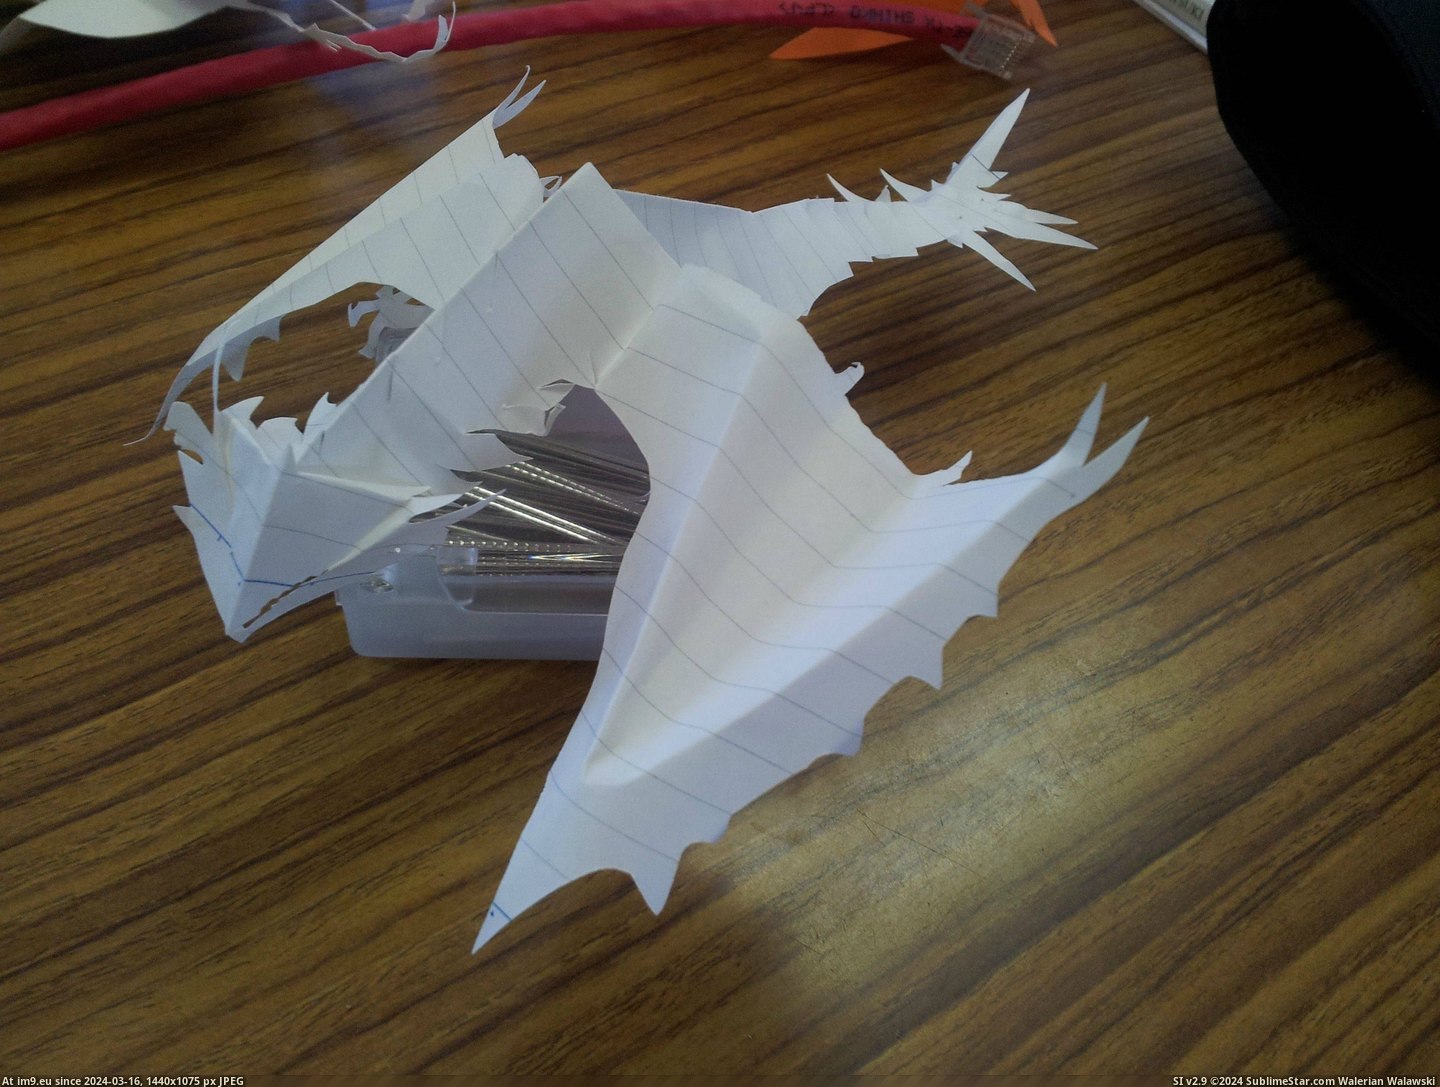 #One #Paper #Students #Creatures #Freehand #Bored #Completely [Pics] One of my students makes these creatures out of paper completely freehand whenever he is bored 4 Pic. (Image of album My r/PICS favs))